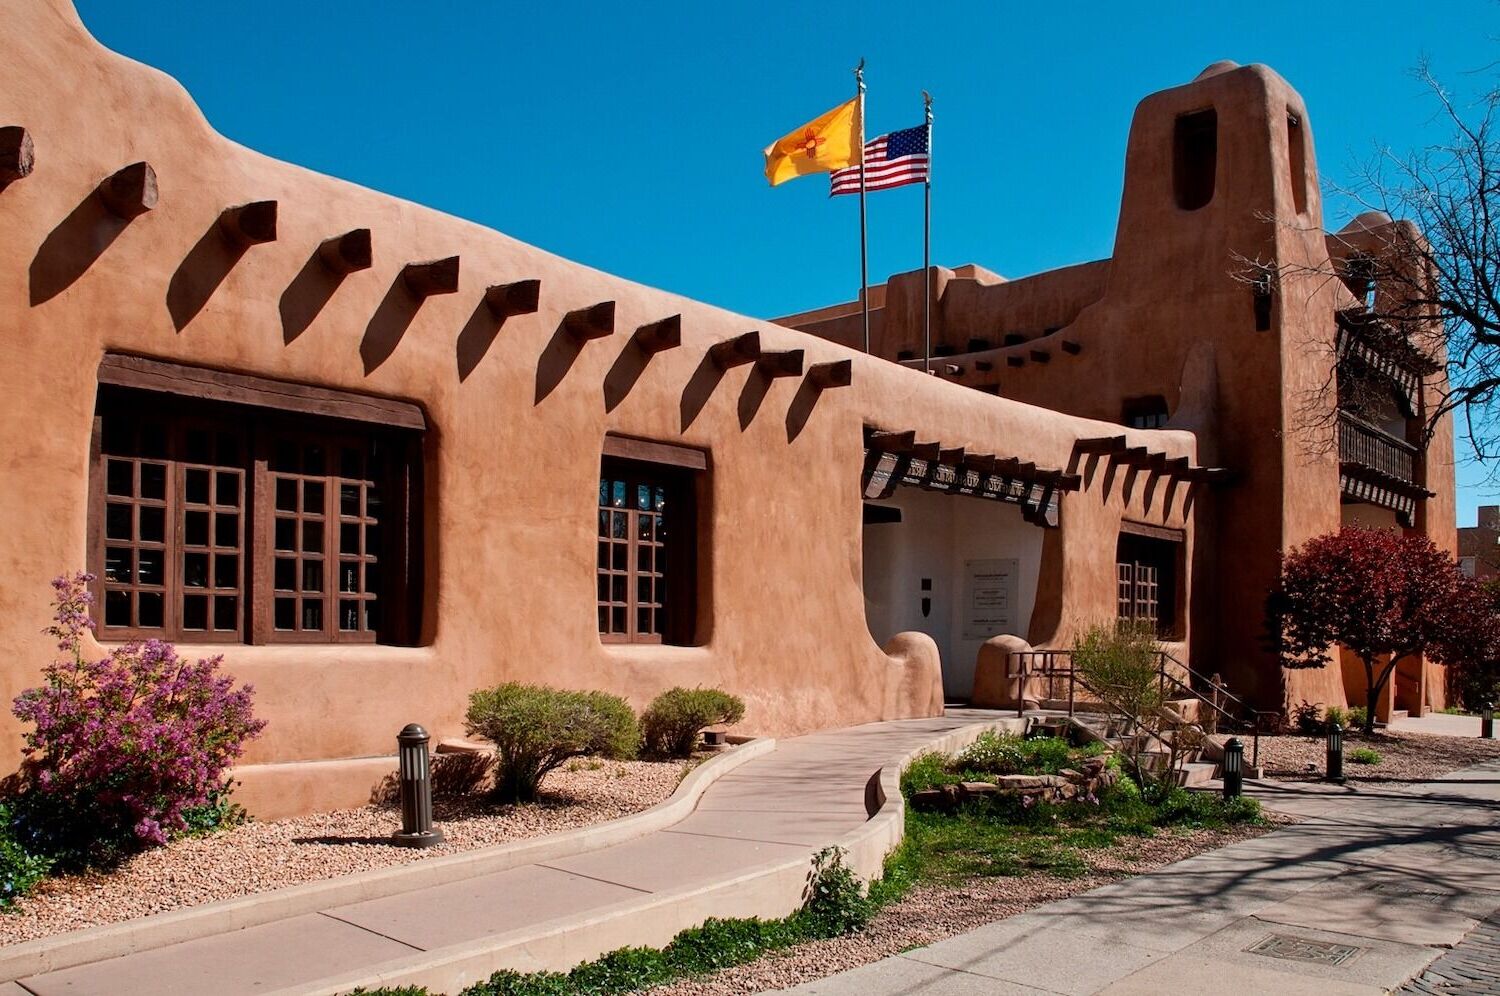 8-facts-about-art-and-music-scene-in-santa-fe-new-mexico